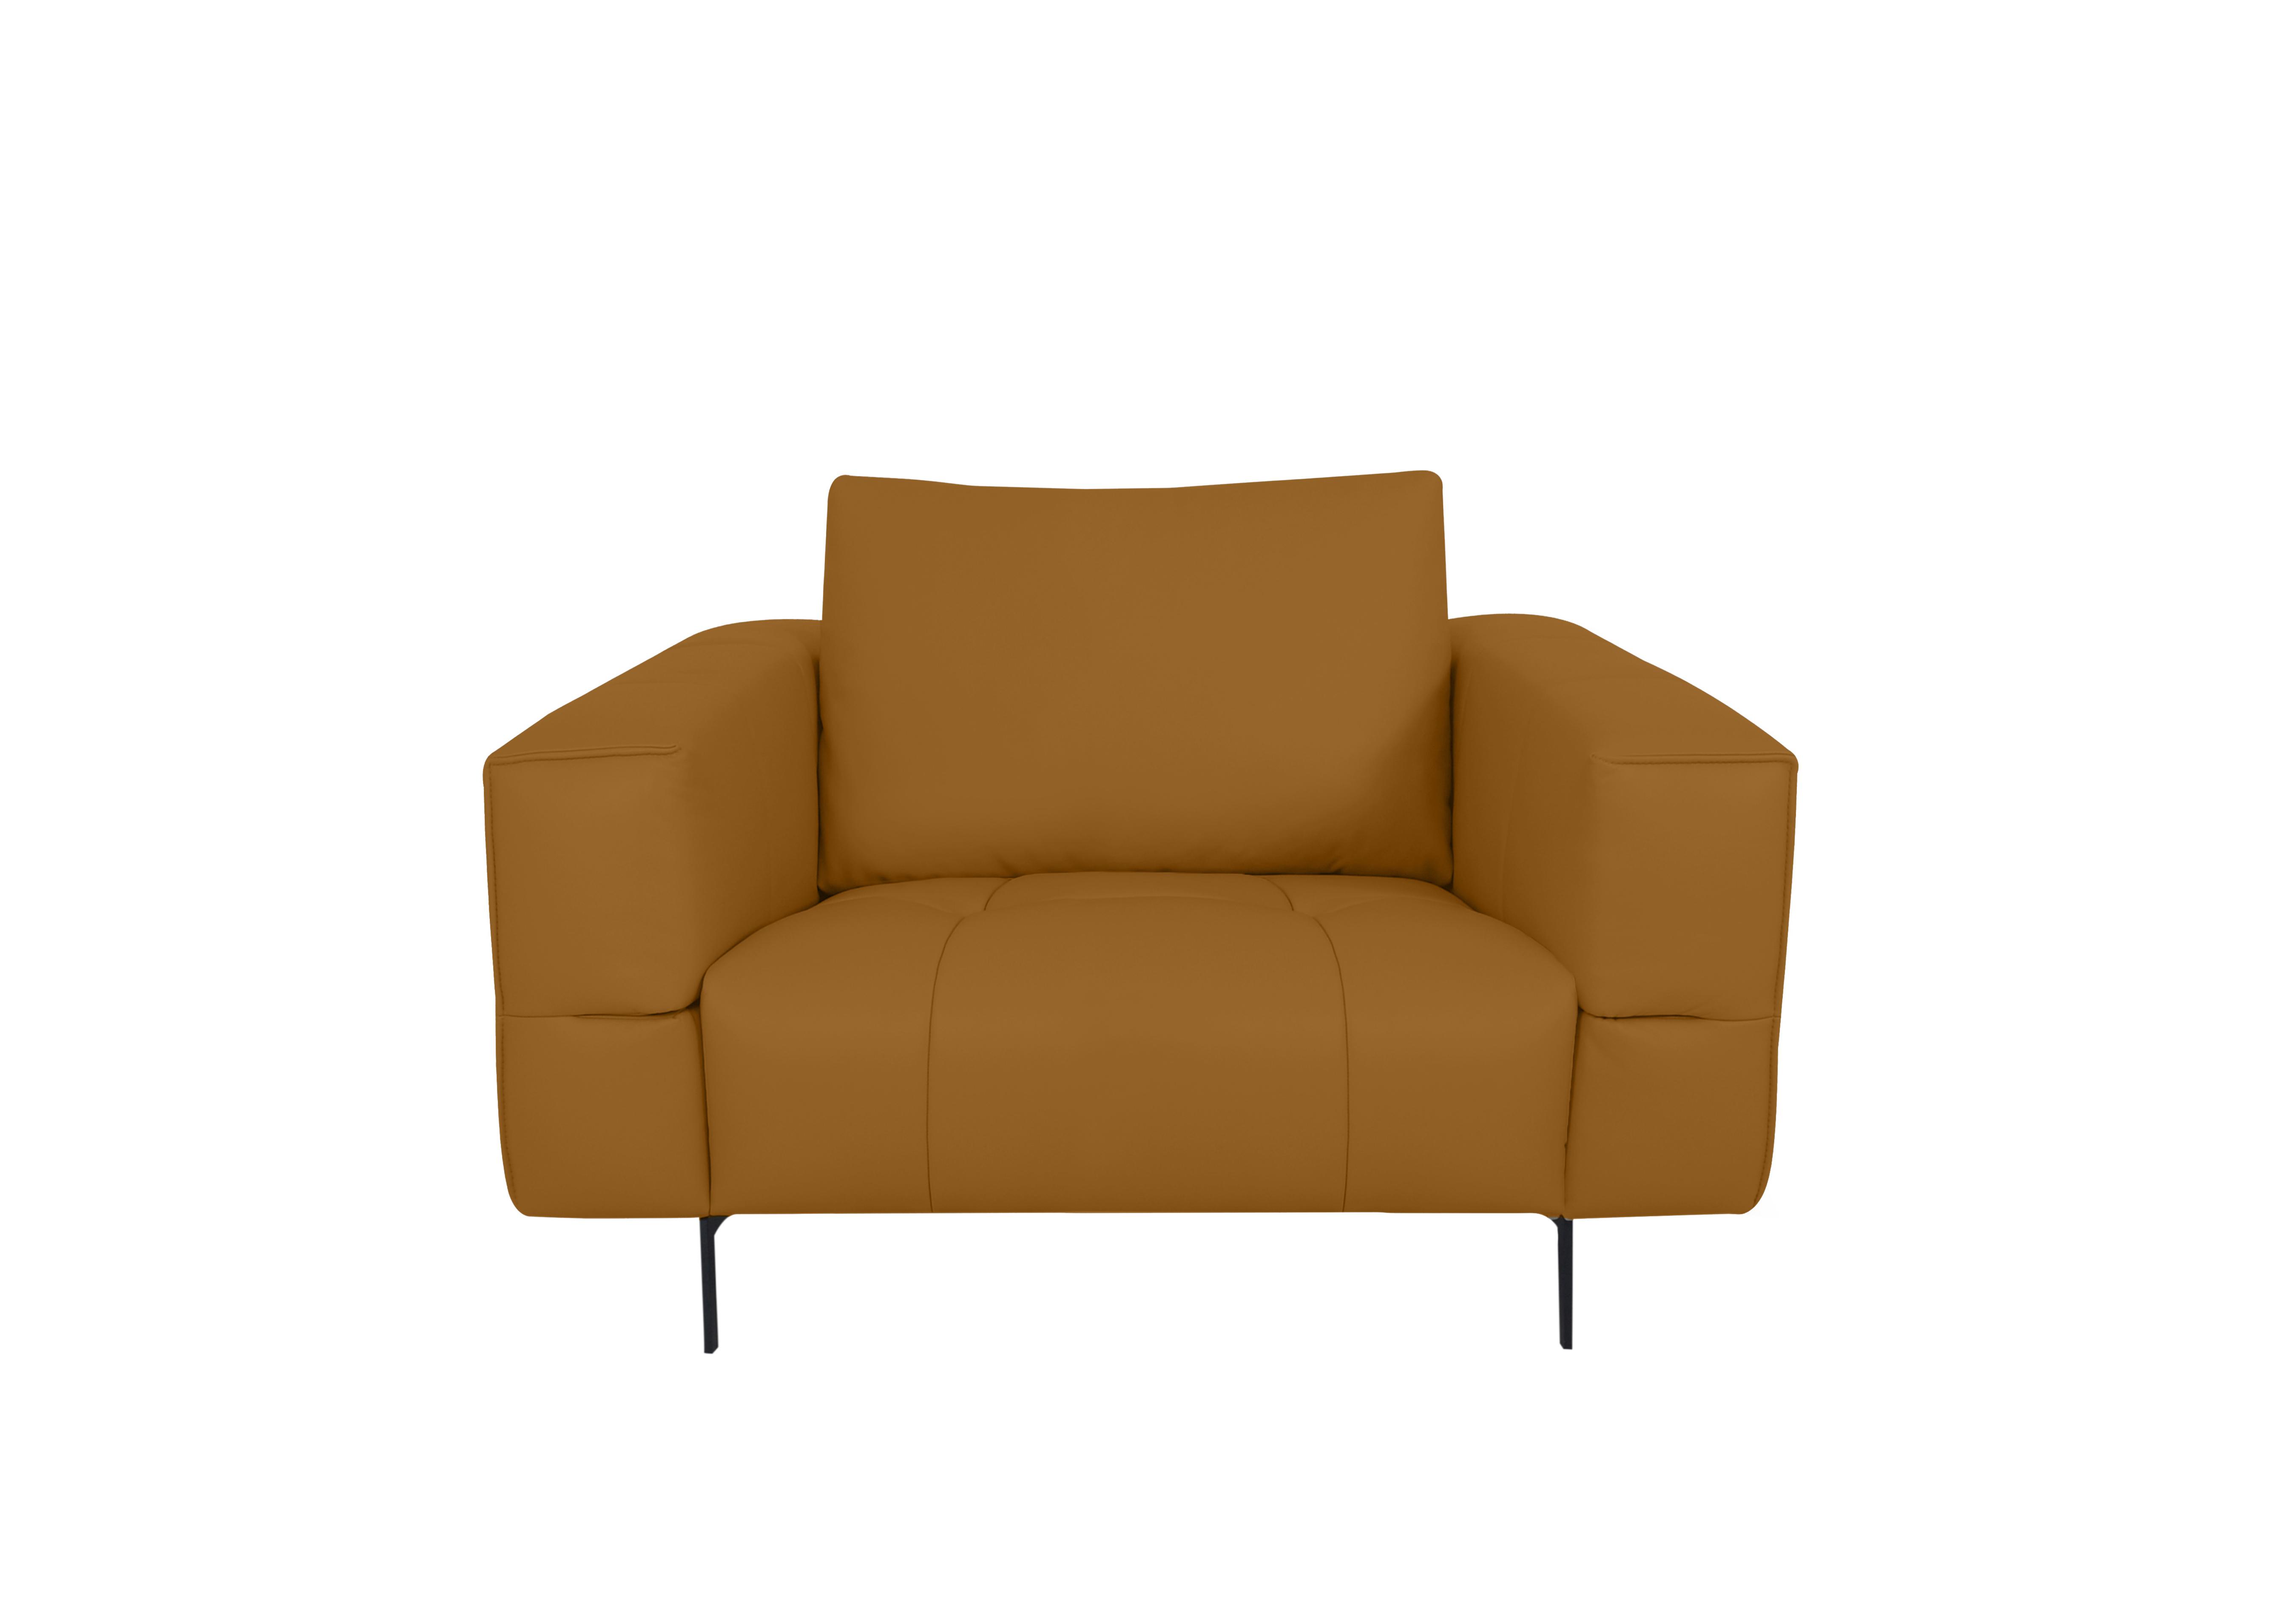 Lawson Leather Armchair in Np-606e Honey Yellow on Furniture Village